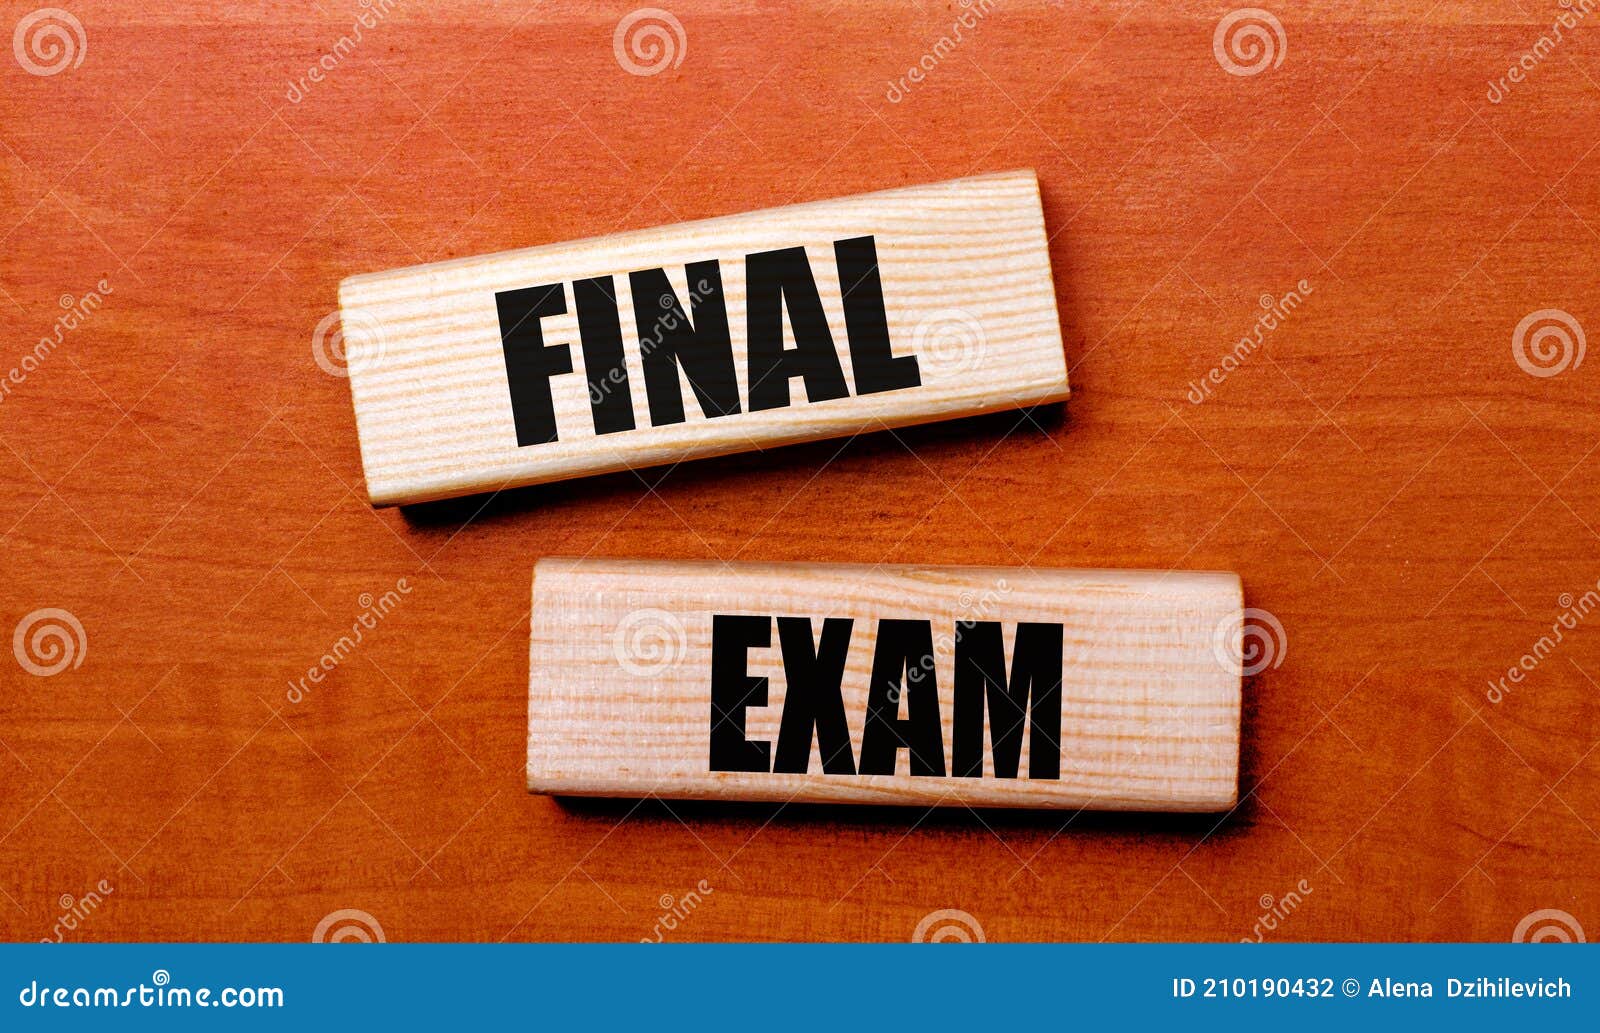 on a wooden table are two wooden blocks with the text final exam